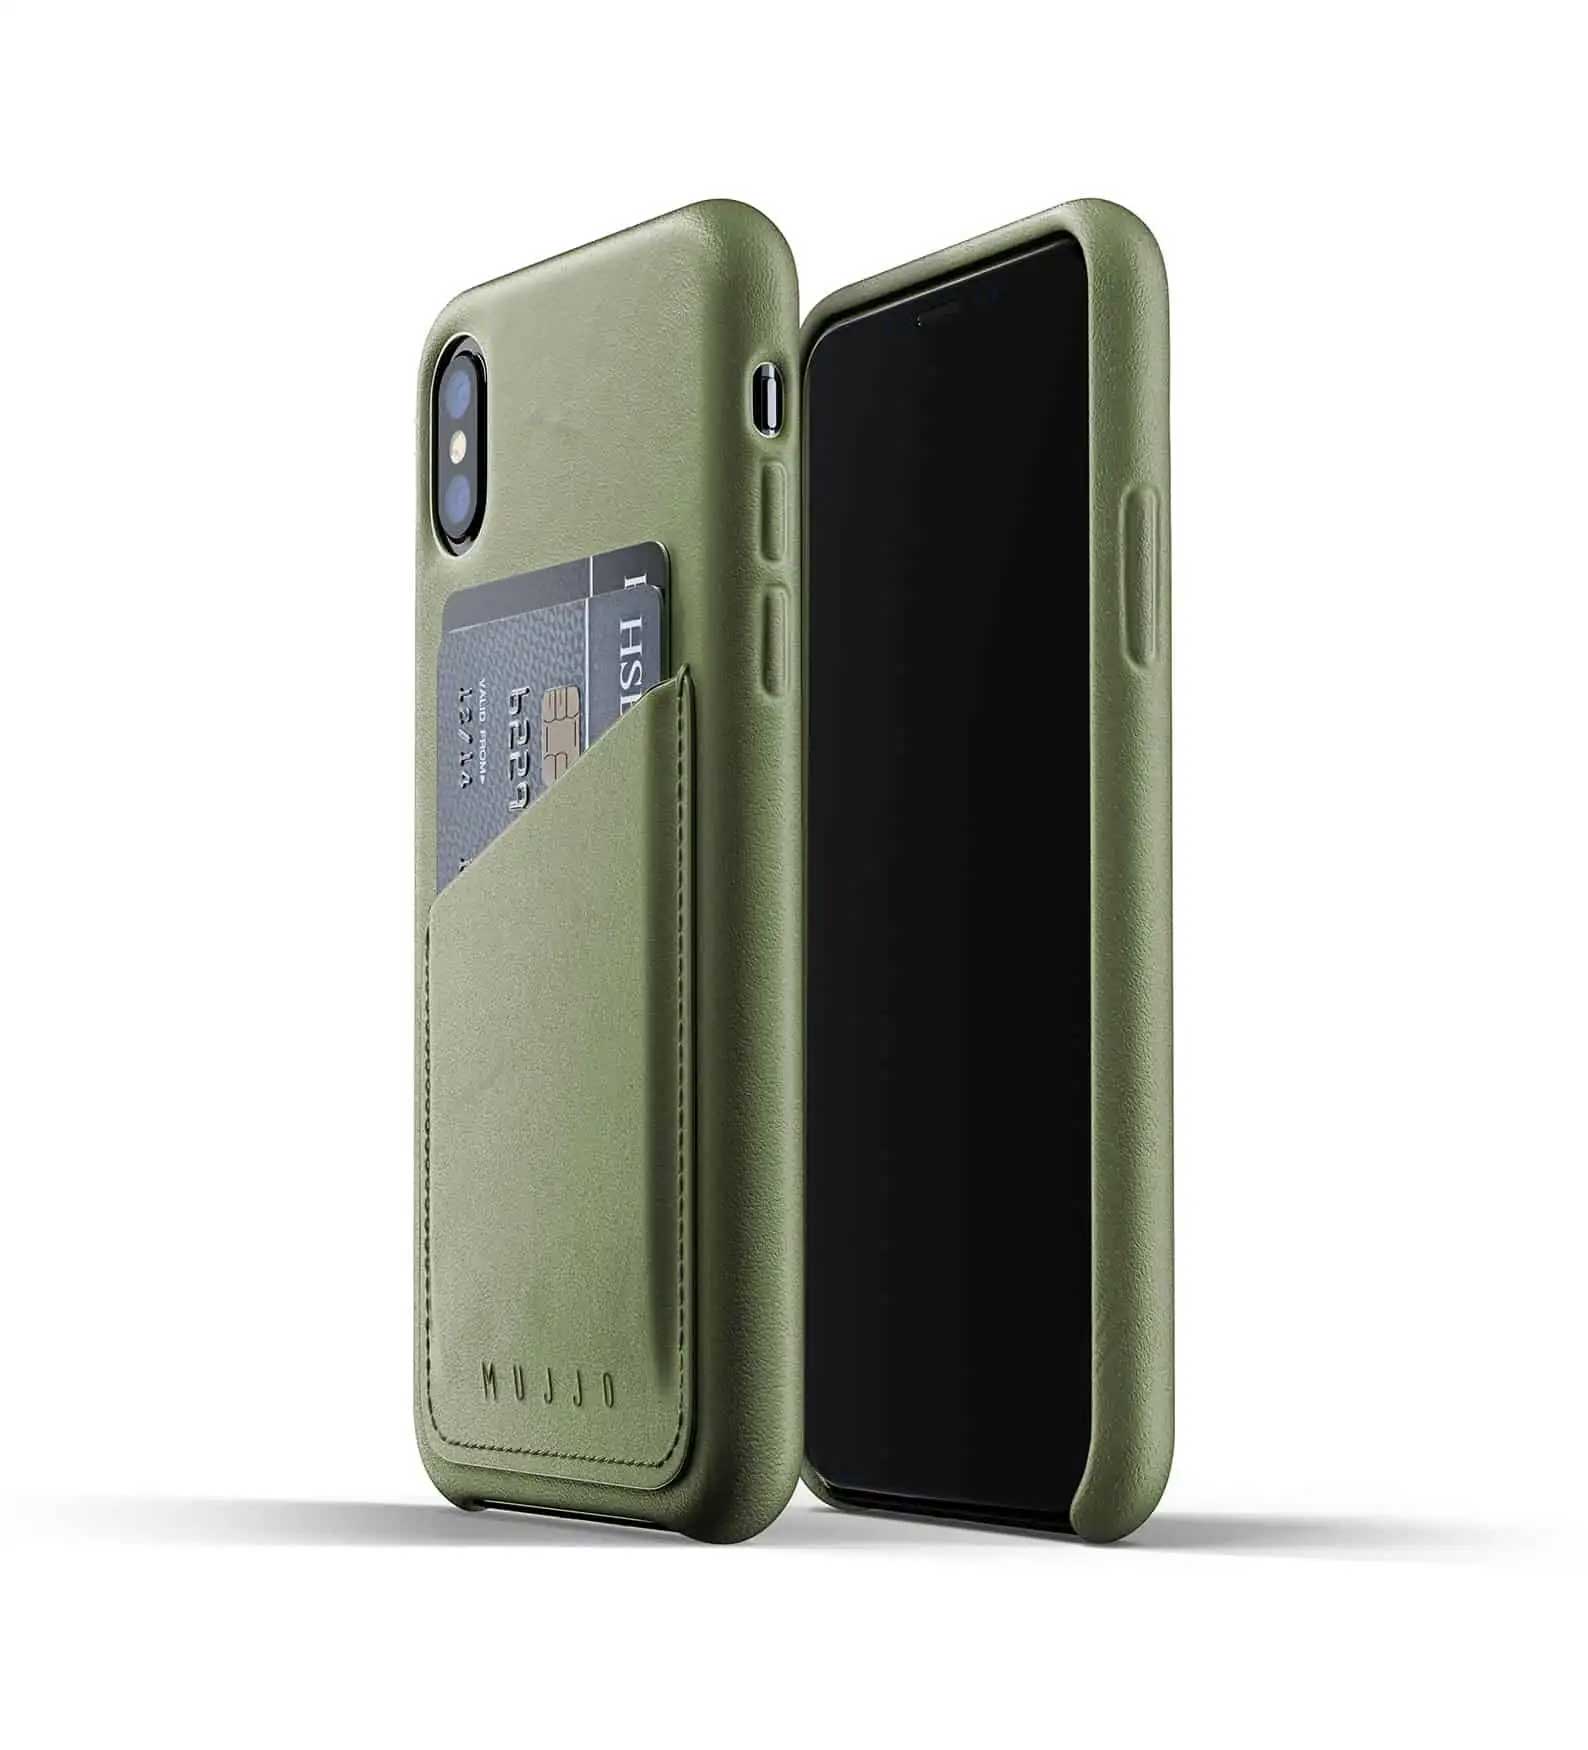 Mujjo Full Leather Slim Wallet Case w/ Microfibre Lining For iPhone X / XS - Olive Green - Mac Addict